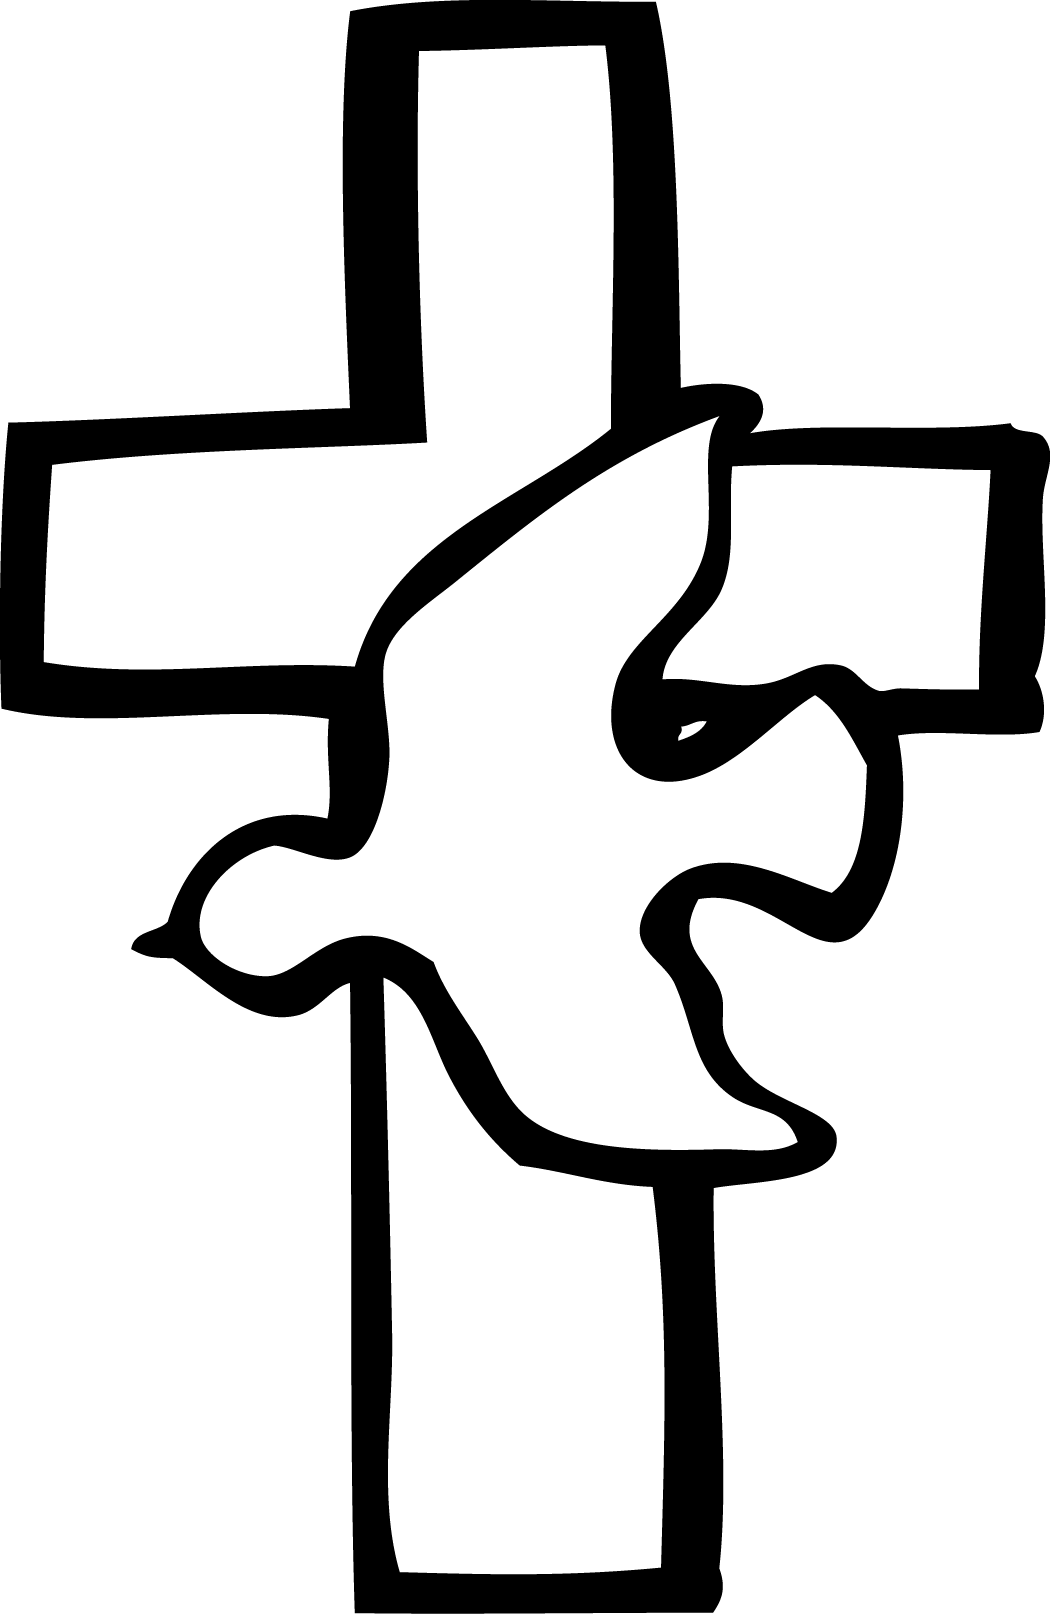 Cross clipart black and white free images 3